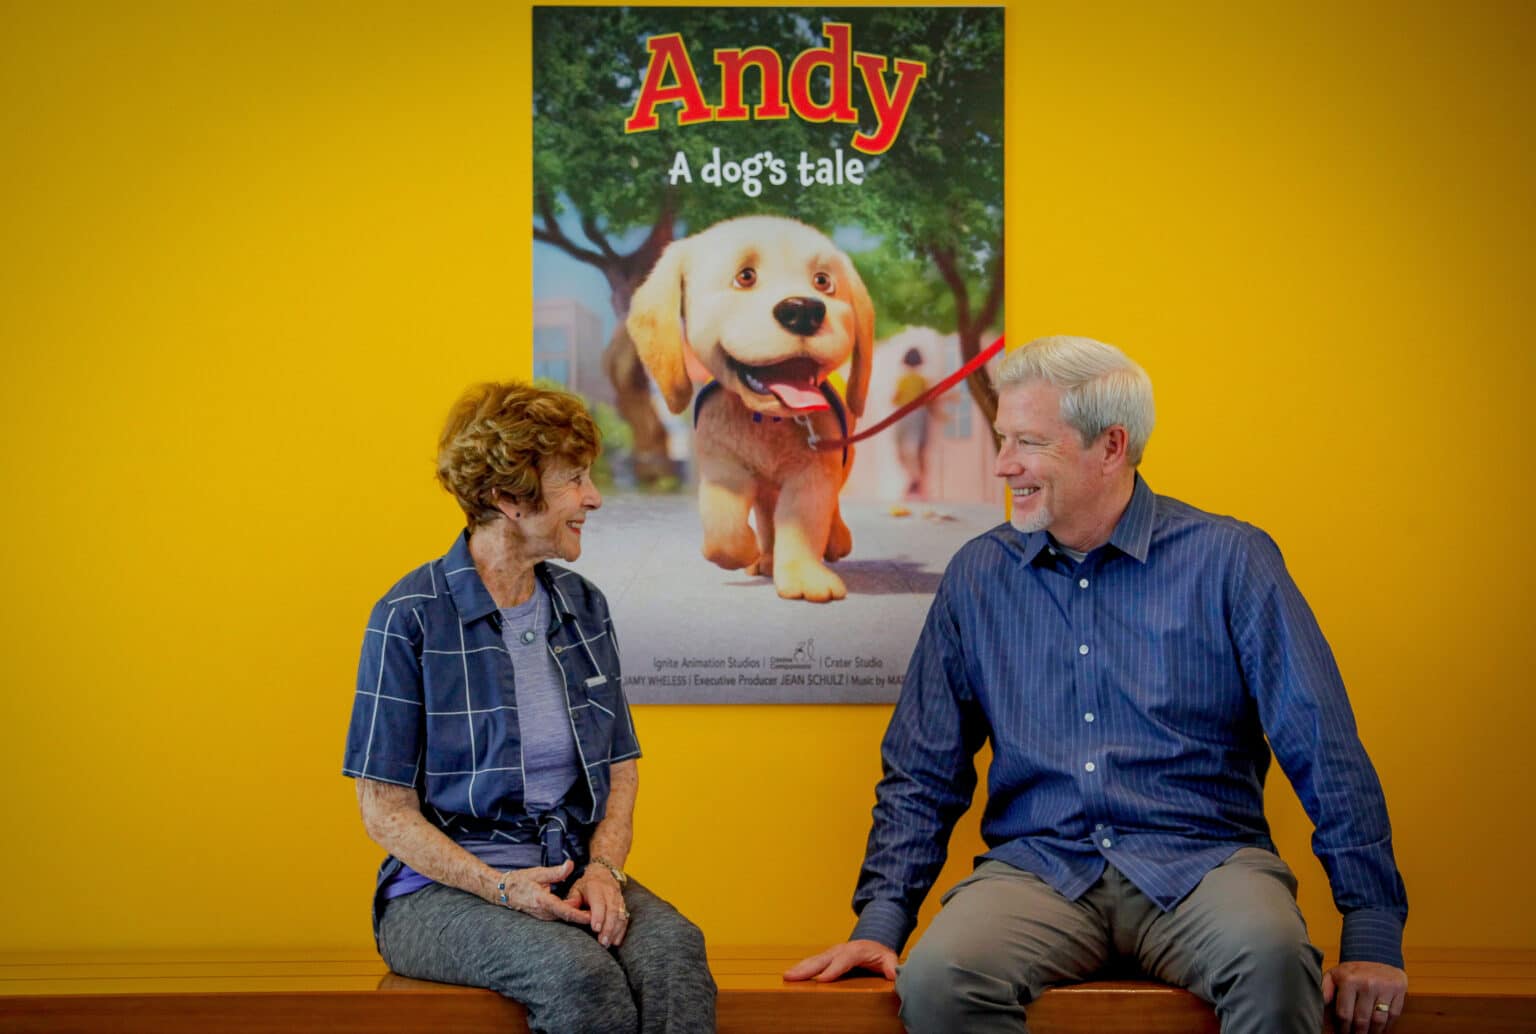 Man and woman seating with the Andy film poster behind